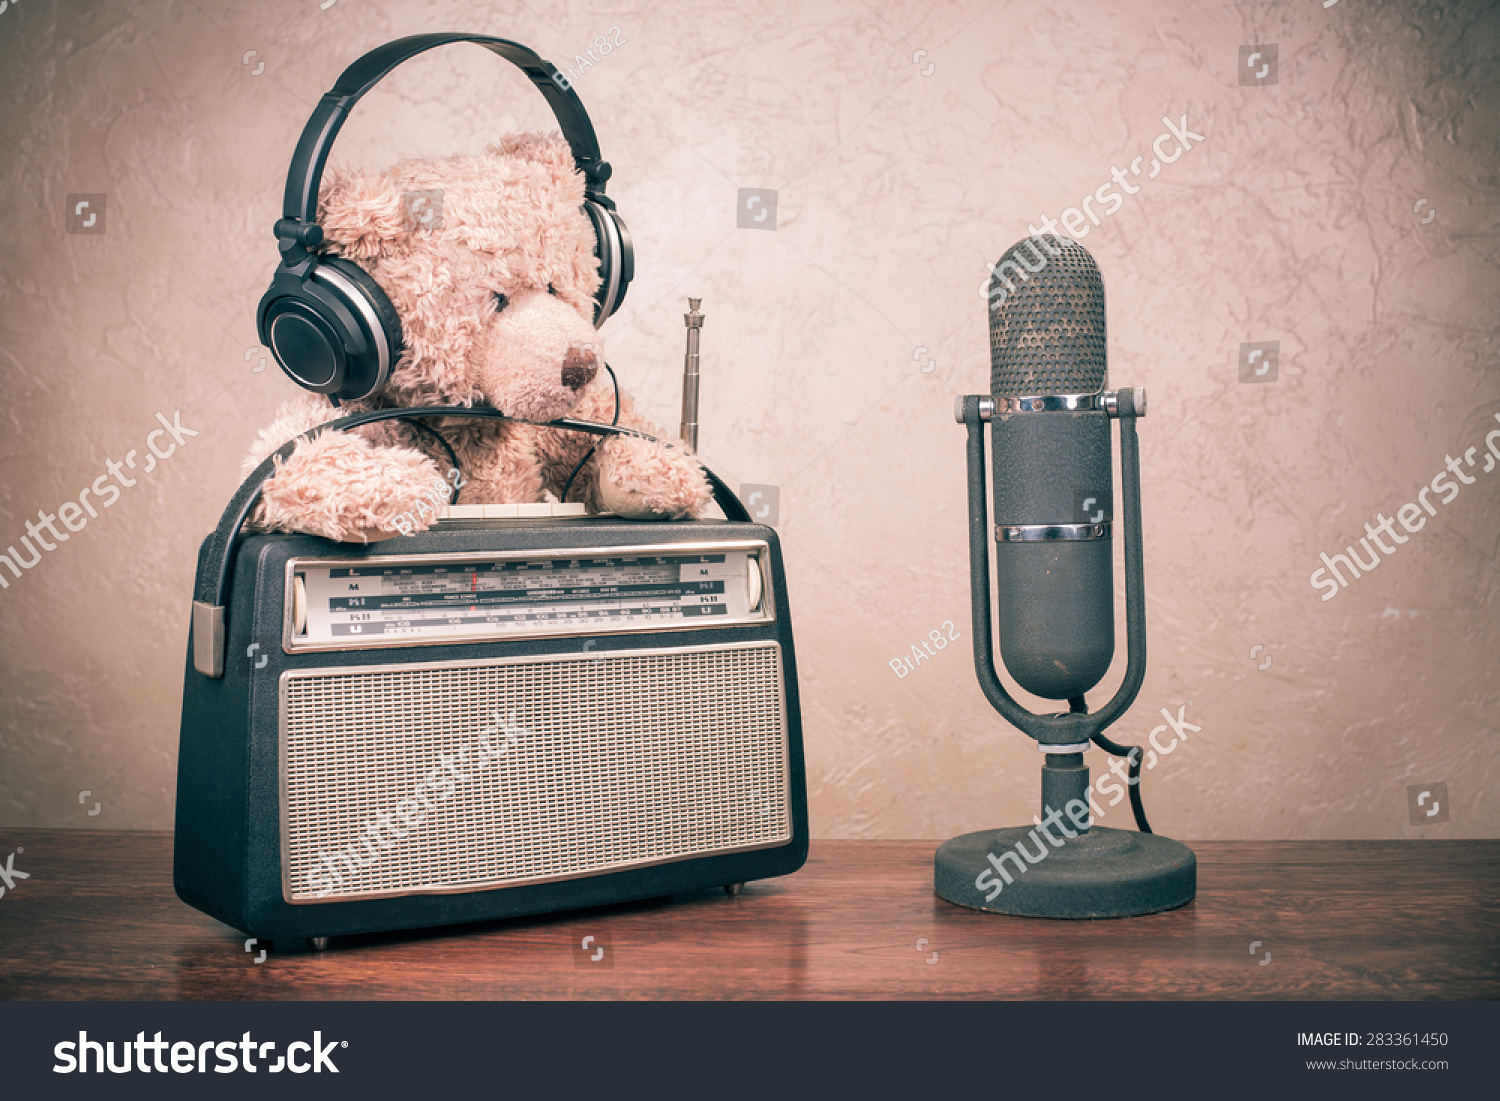 Retro radio from 60s, Teddy Bear toy with headphones and old microphone on table. Vintage instagram style filtered conceptual photo #283361450